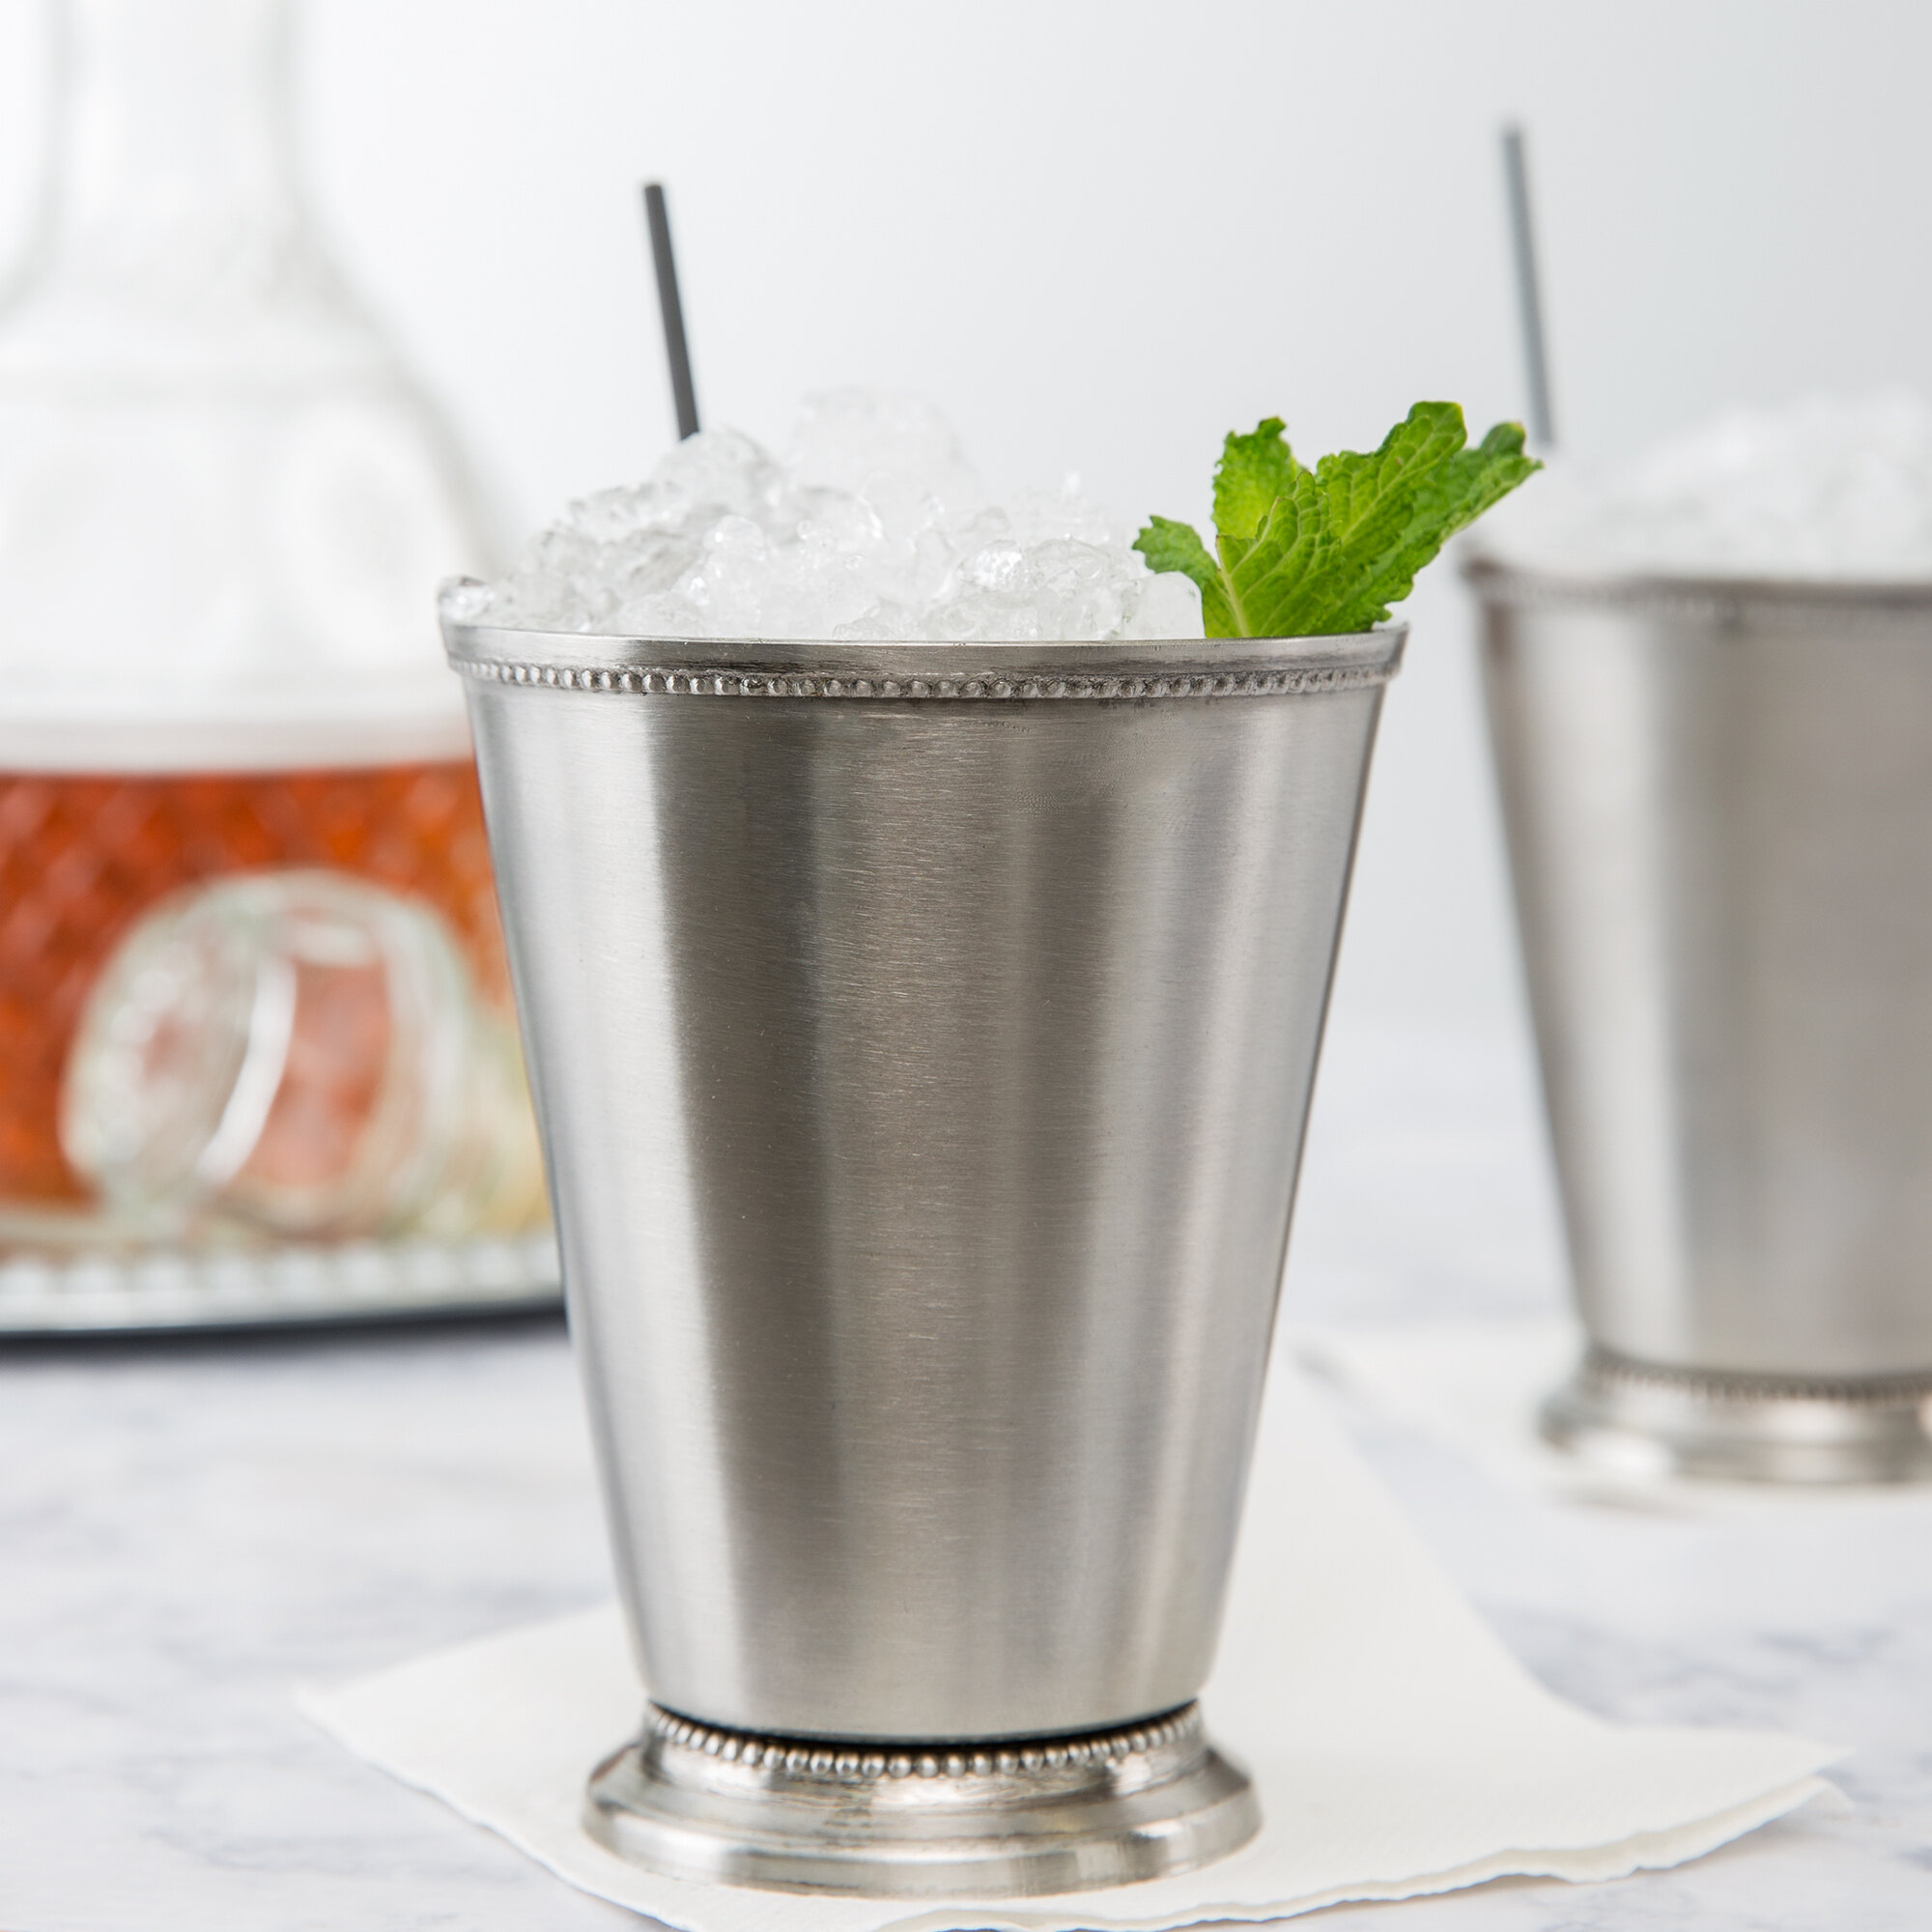 Core 16 oz. Stainless Steel Mint Julep Cup with Smooth Finish and Stainless Steel Mint Julep Cups